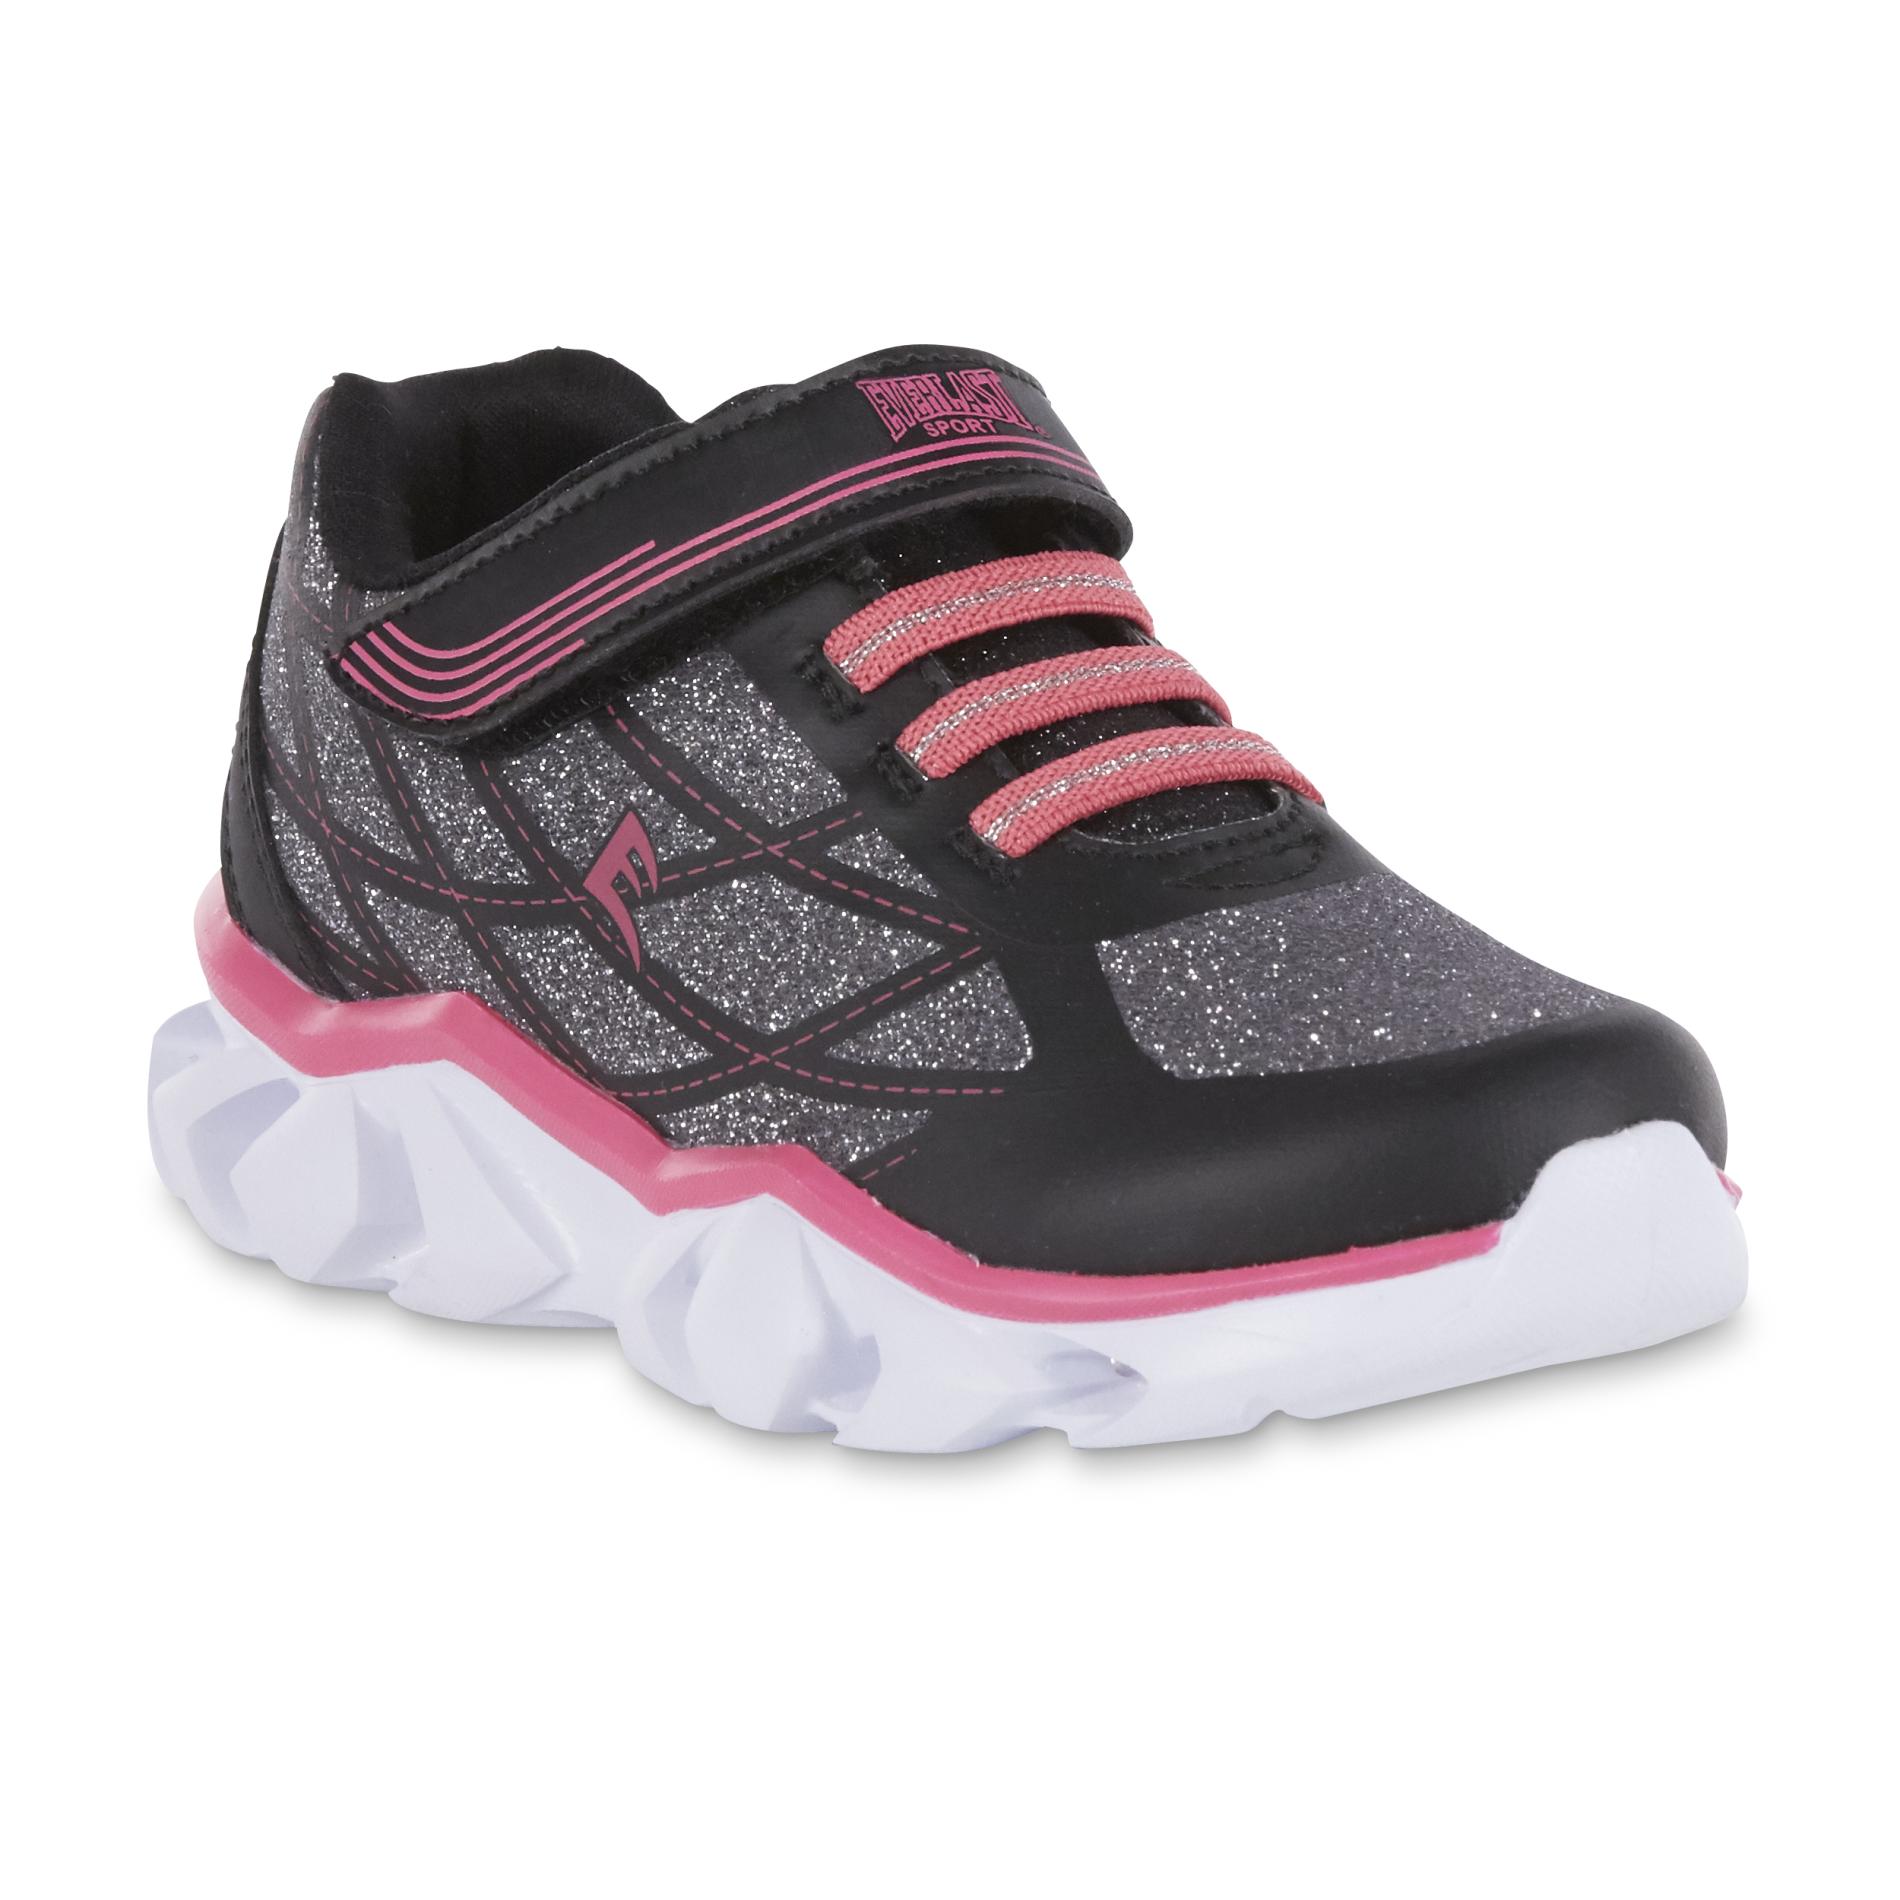 Girls' Shoes: Youth - Kmart